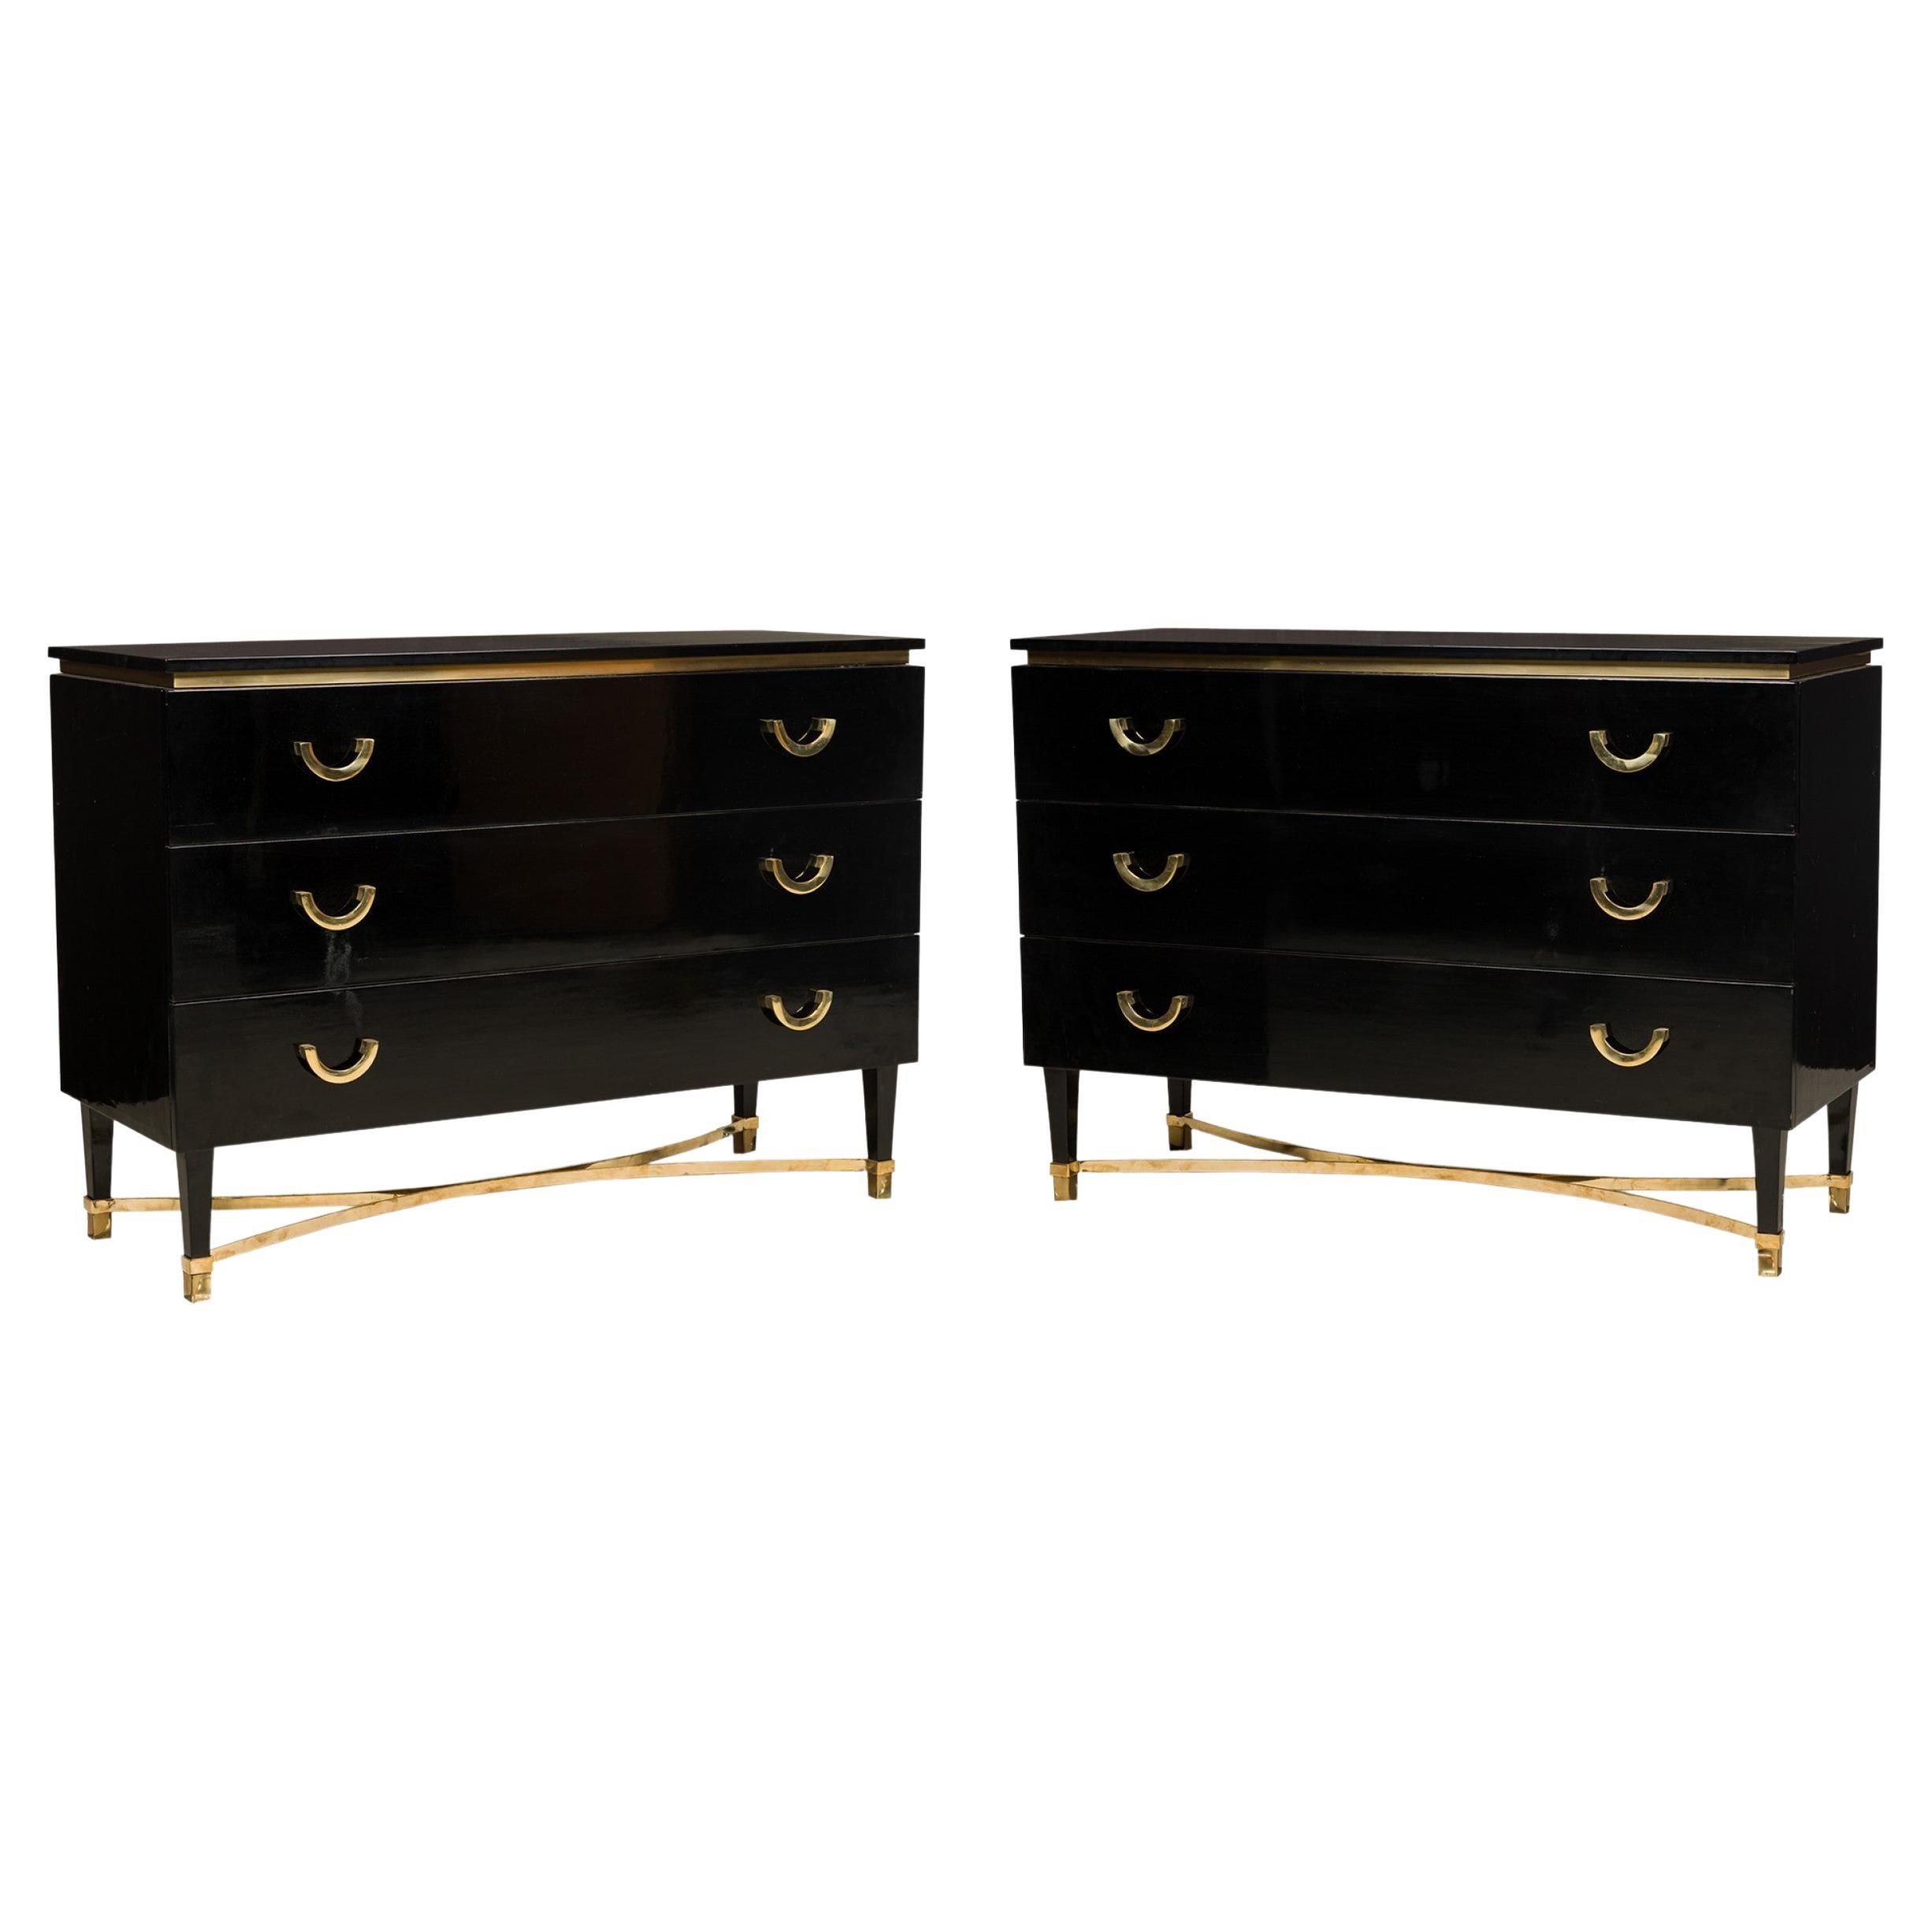 Pair of Midcentury Ebonized Wood & Bronze Mounted Dressers 'Manner of Gucci' For Sale